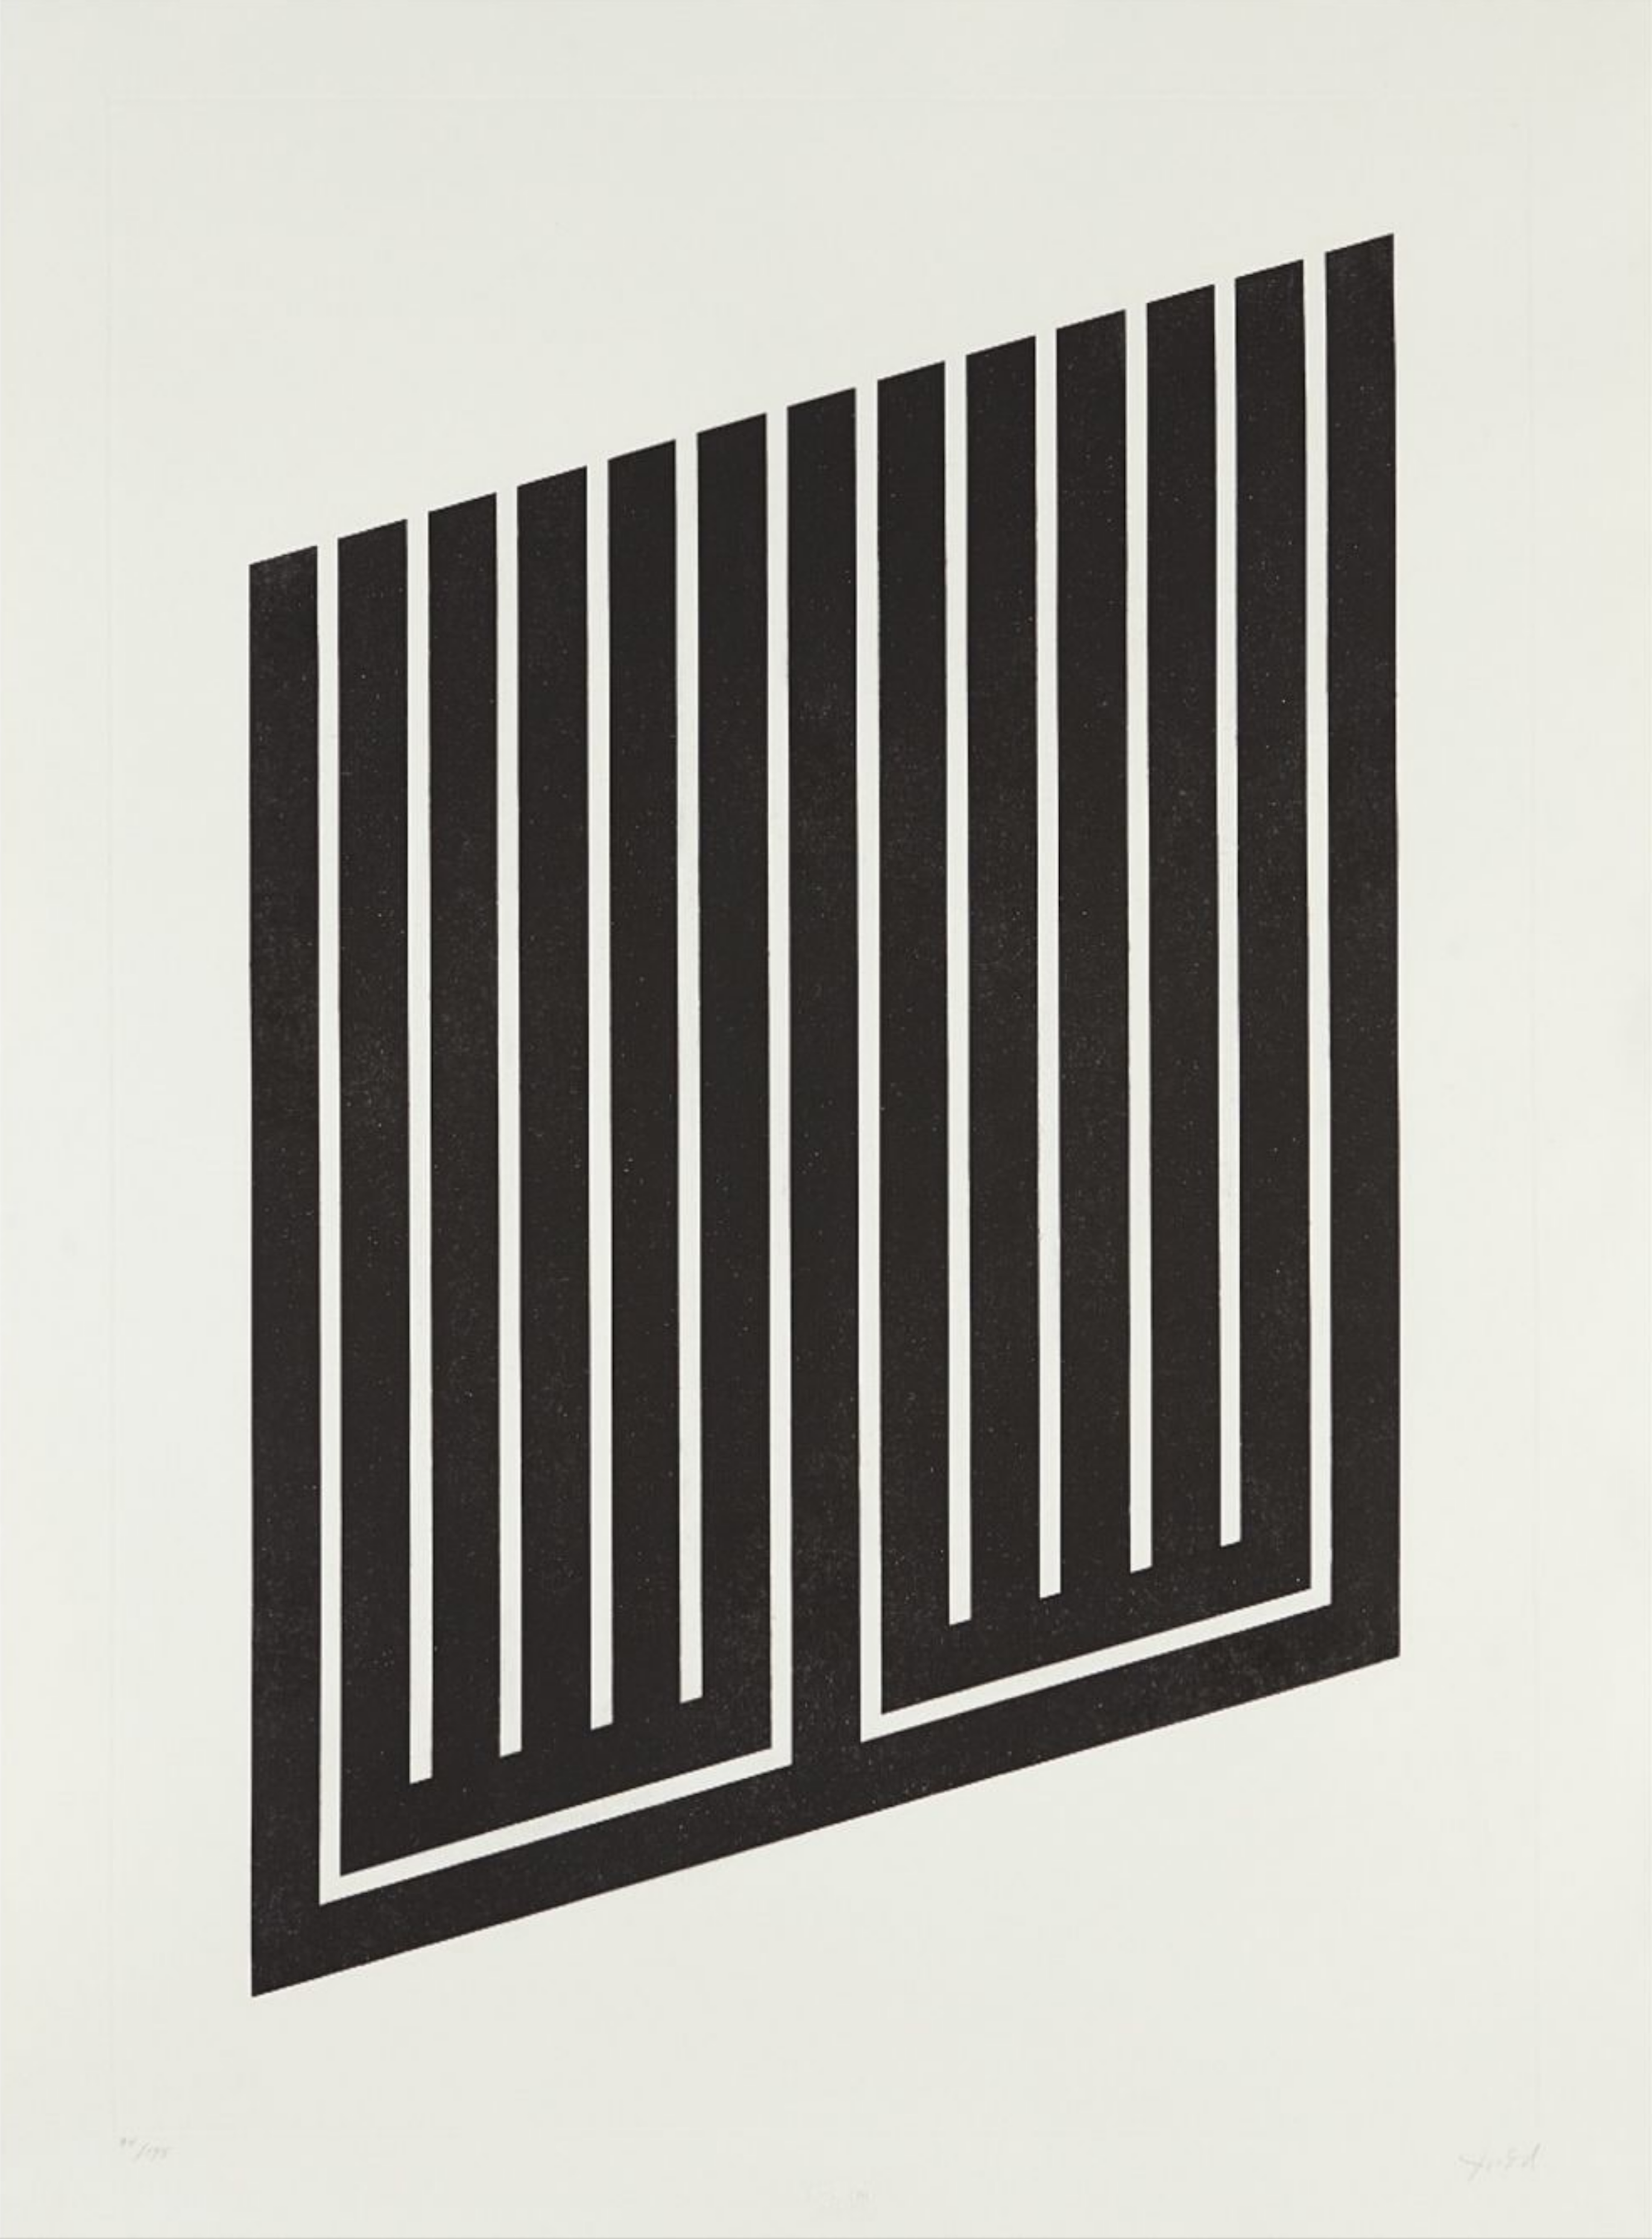 Aquatint by Donald Judd depicting black parallel lines connected with another black line on bottom edge